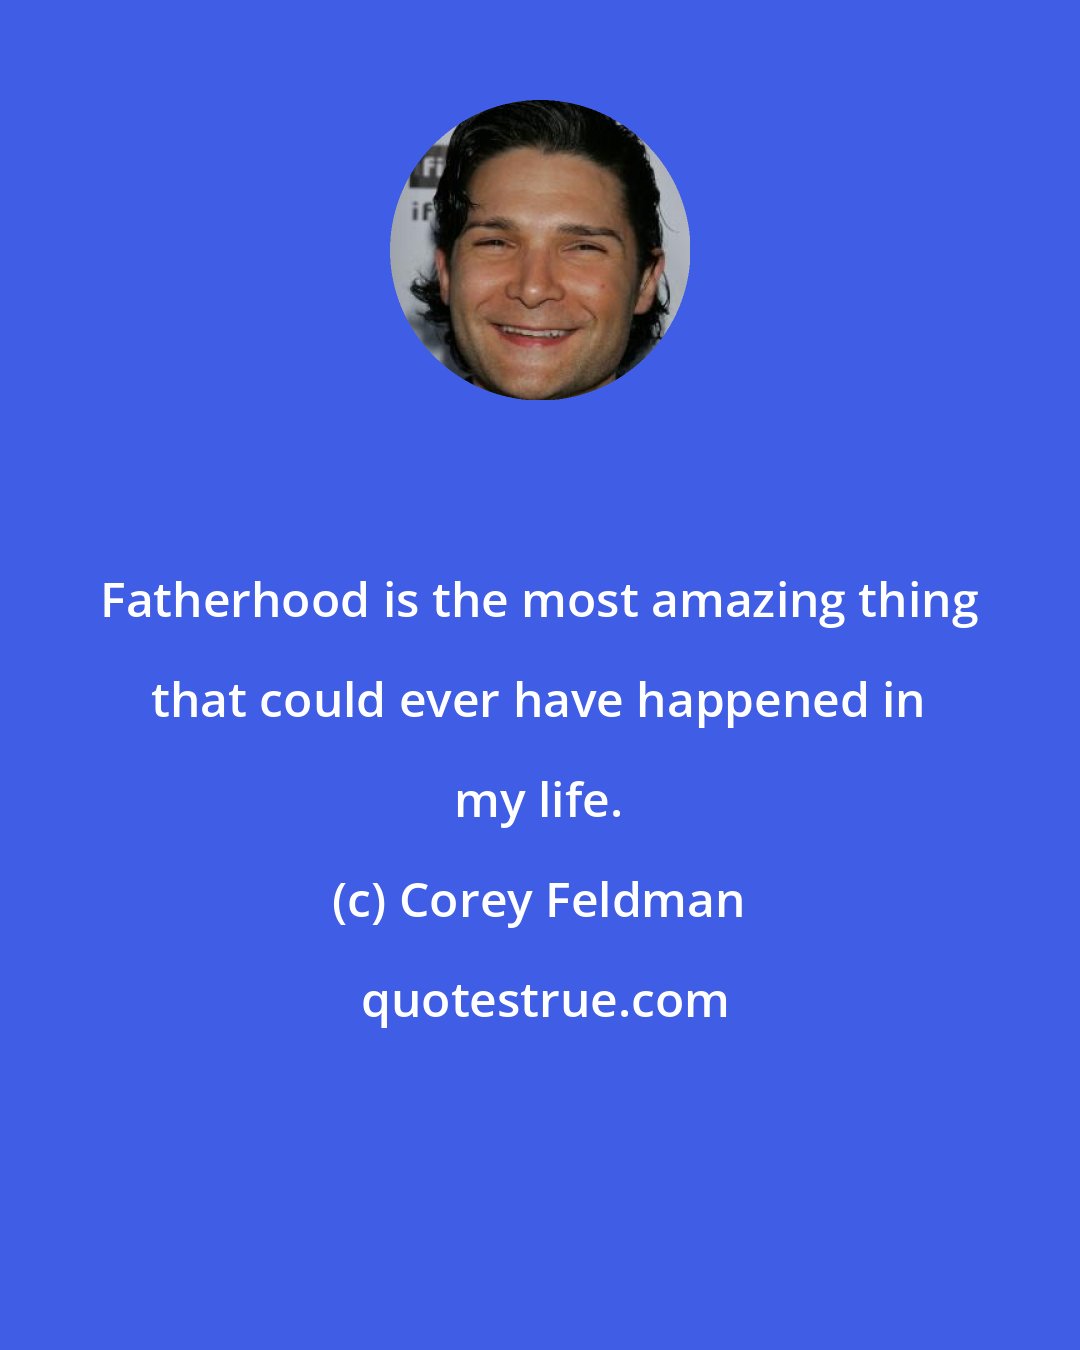 Corey Feldman: Fatherhood is the most amazing thing that could ever have happened in my life.